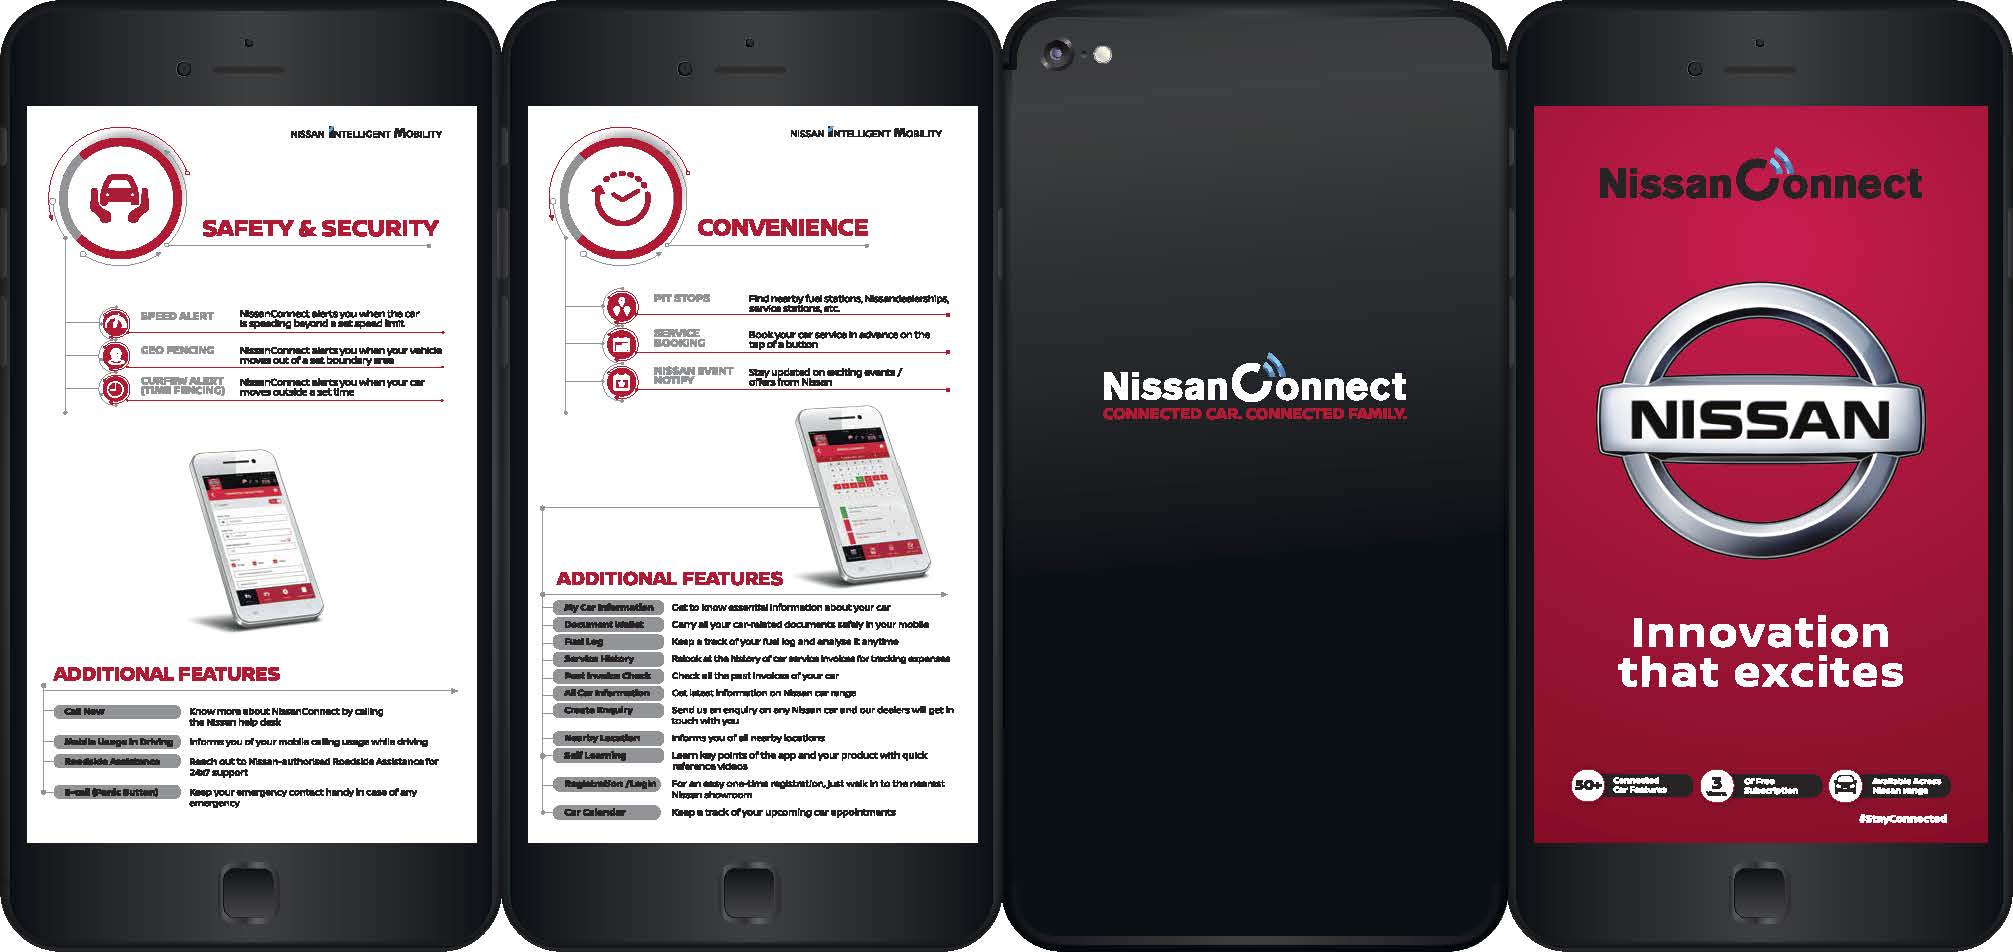 Nissan India Launches Nissanconnect - IEEE Connected Vehicles